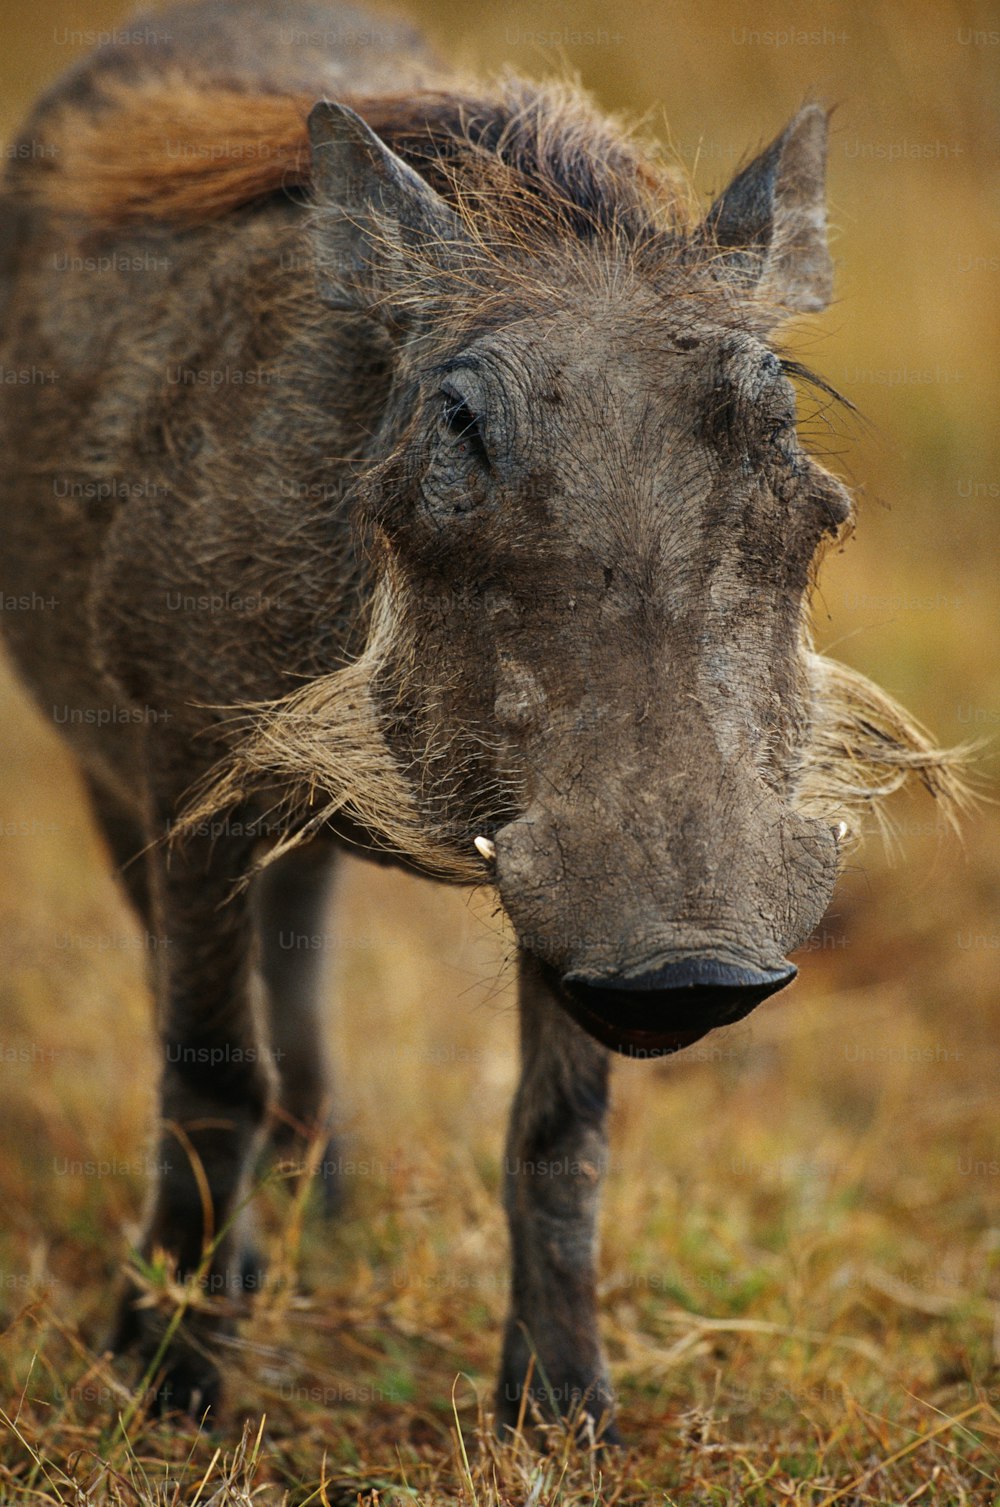 a warthog is standing in a field